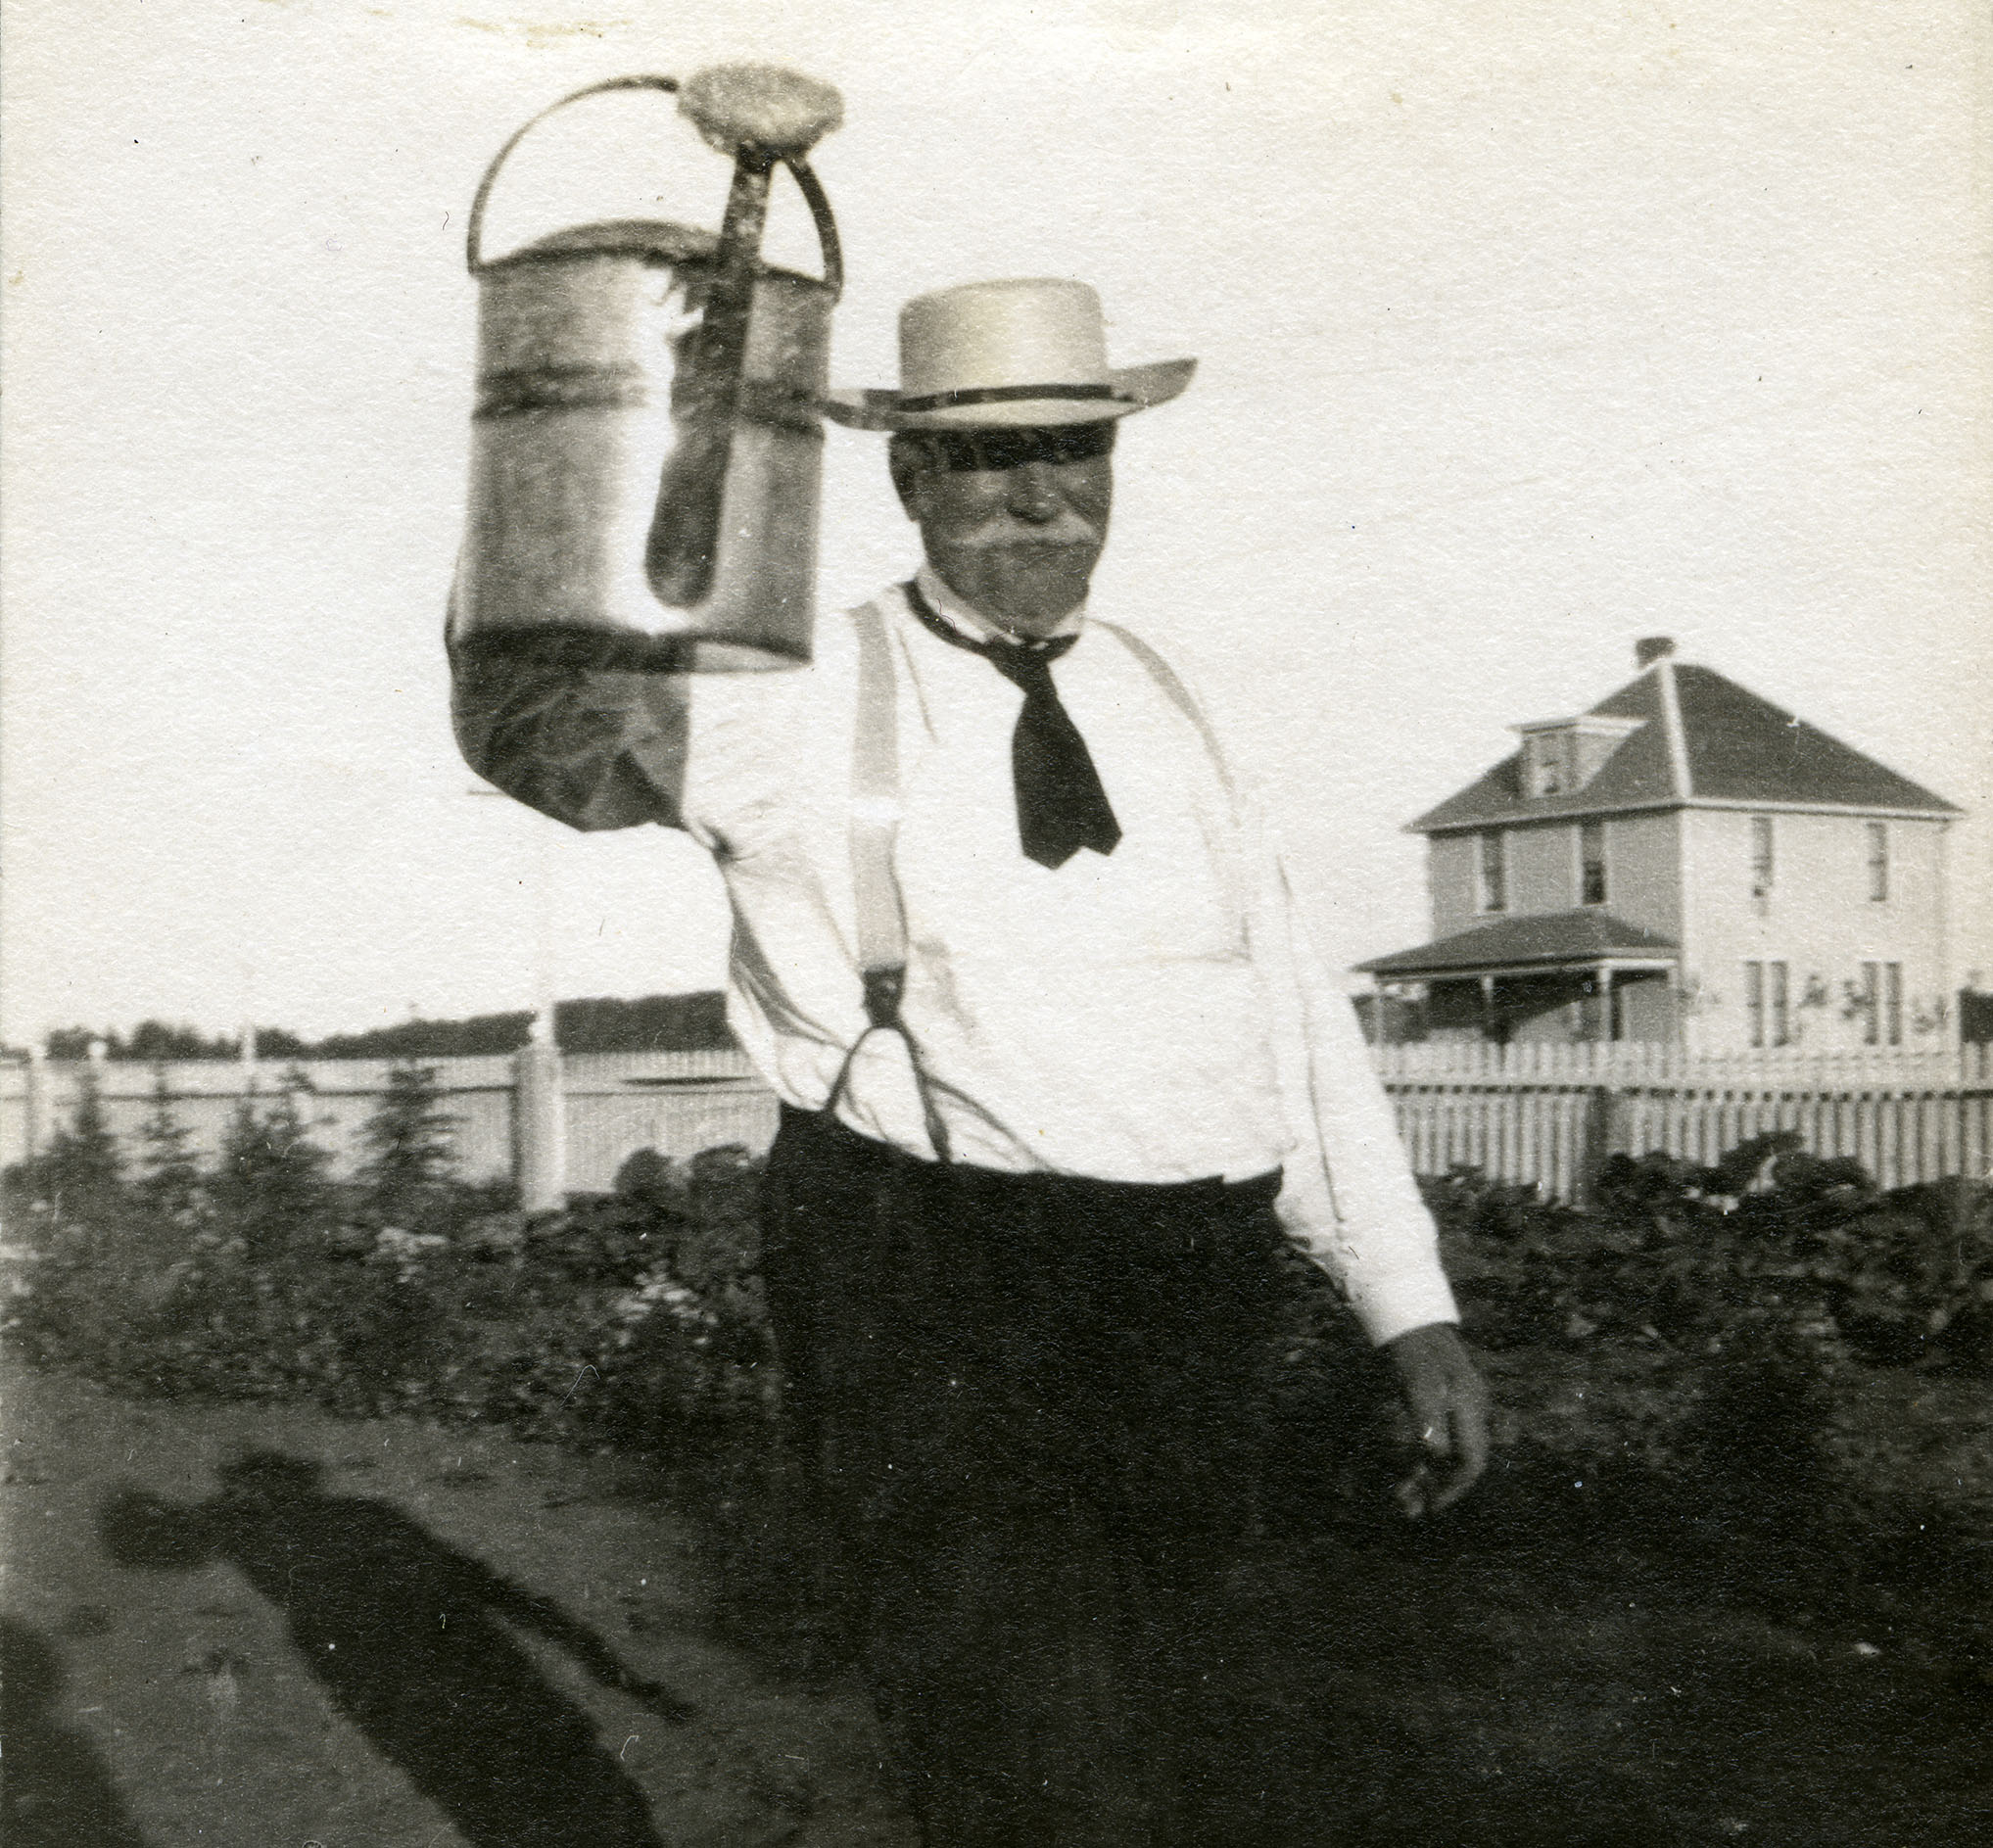 Leonard Gaetz with watering can